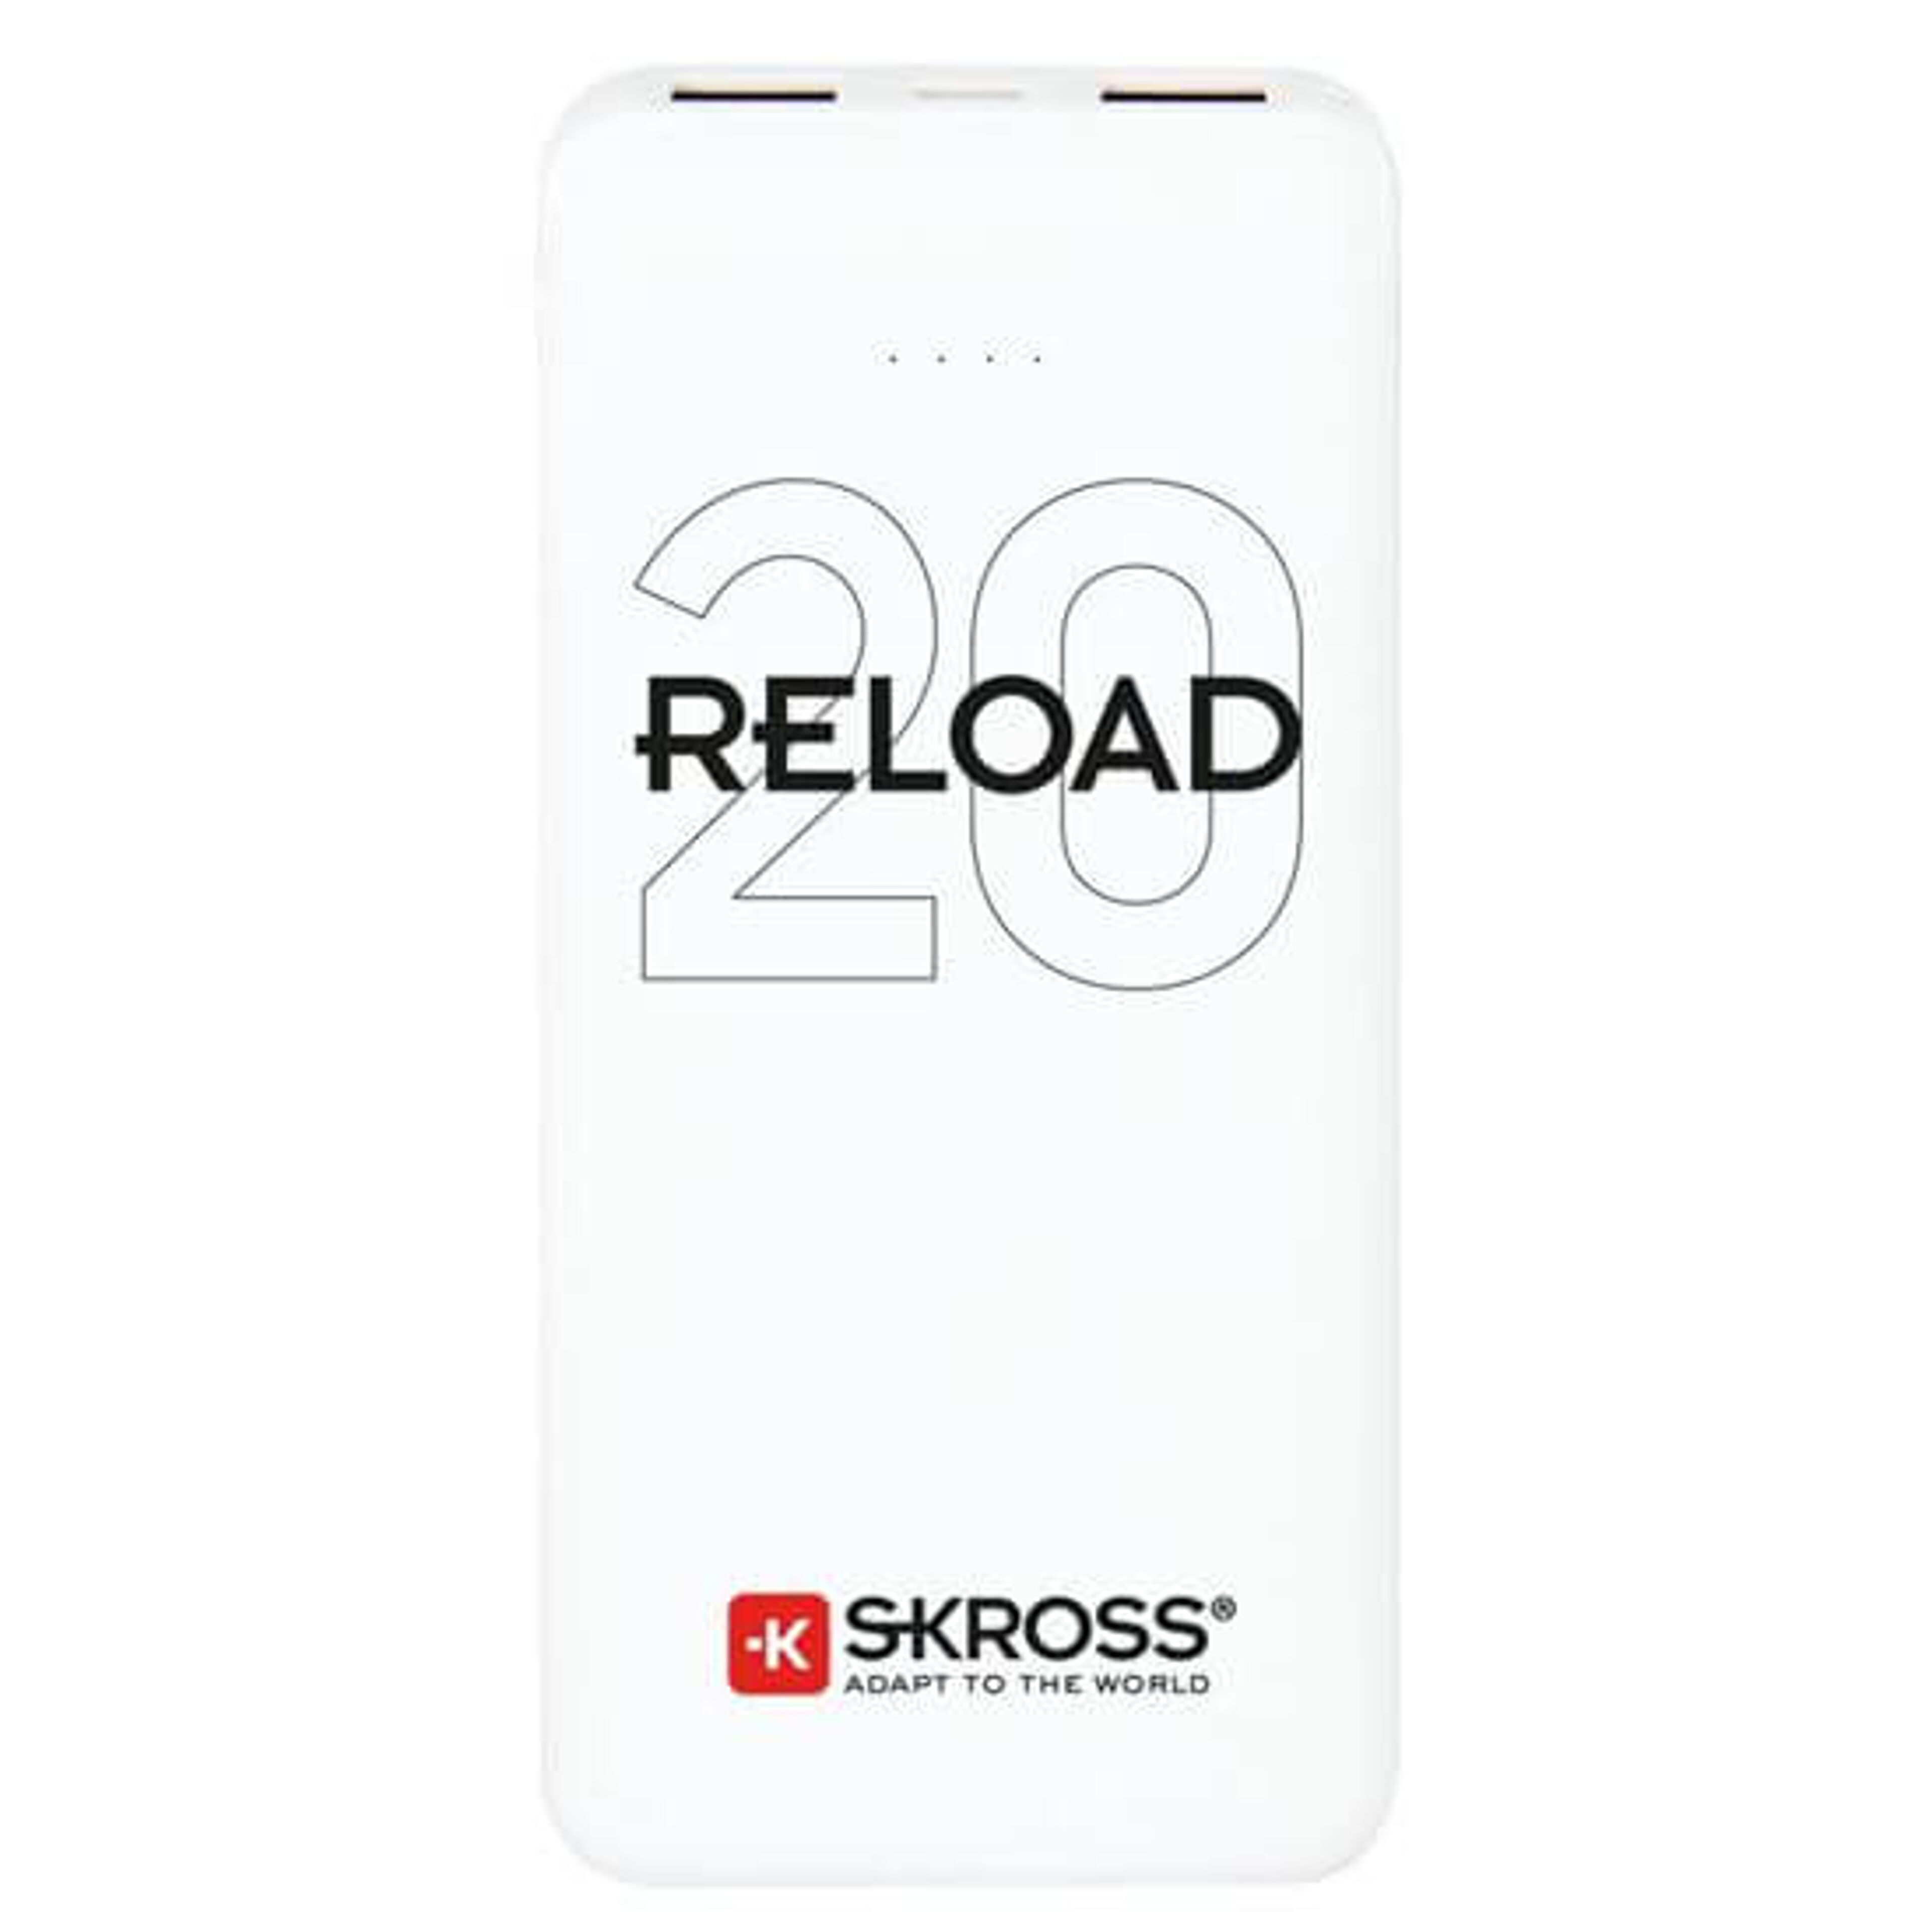 SKROSS powerbank, Reload 20, 20000mAh, 2x 2A output, microUSB cable